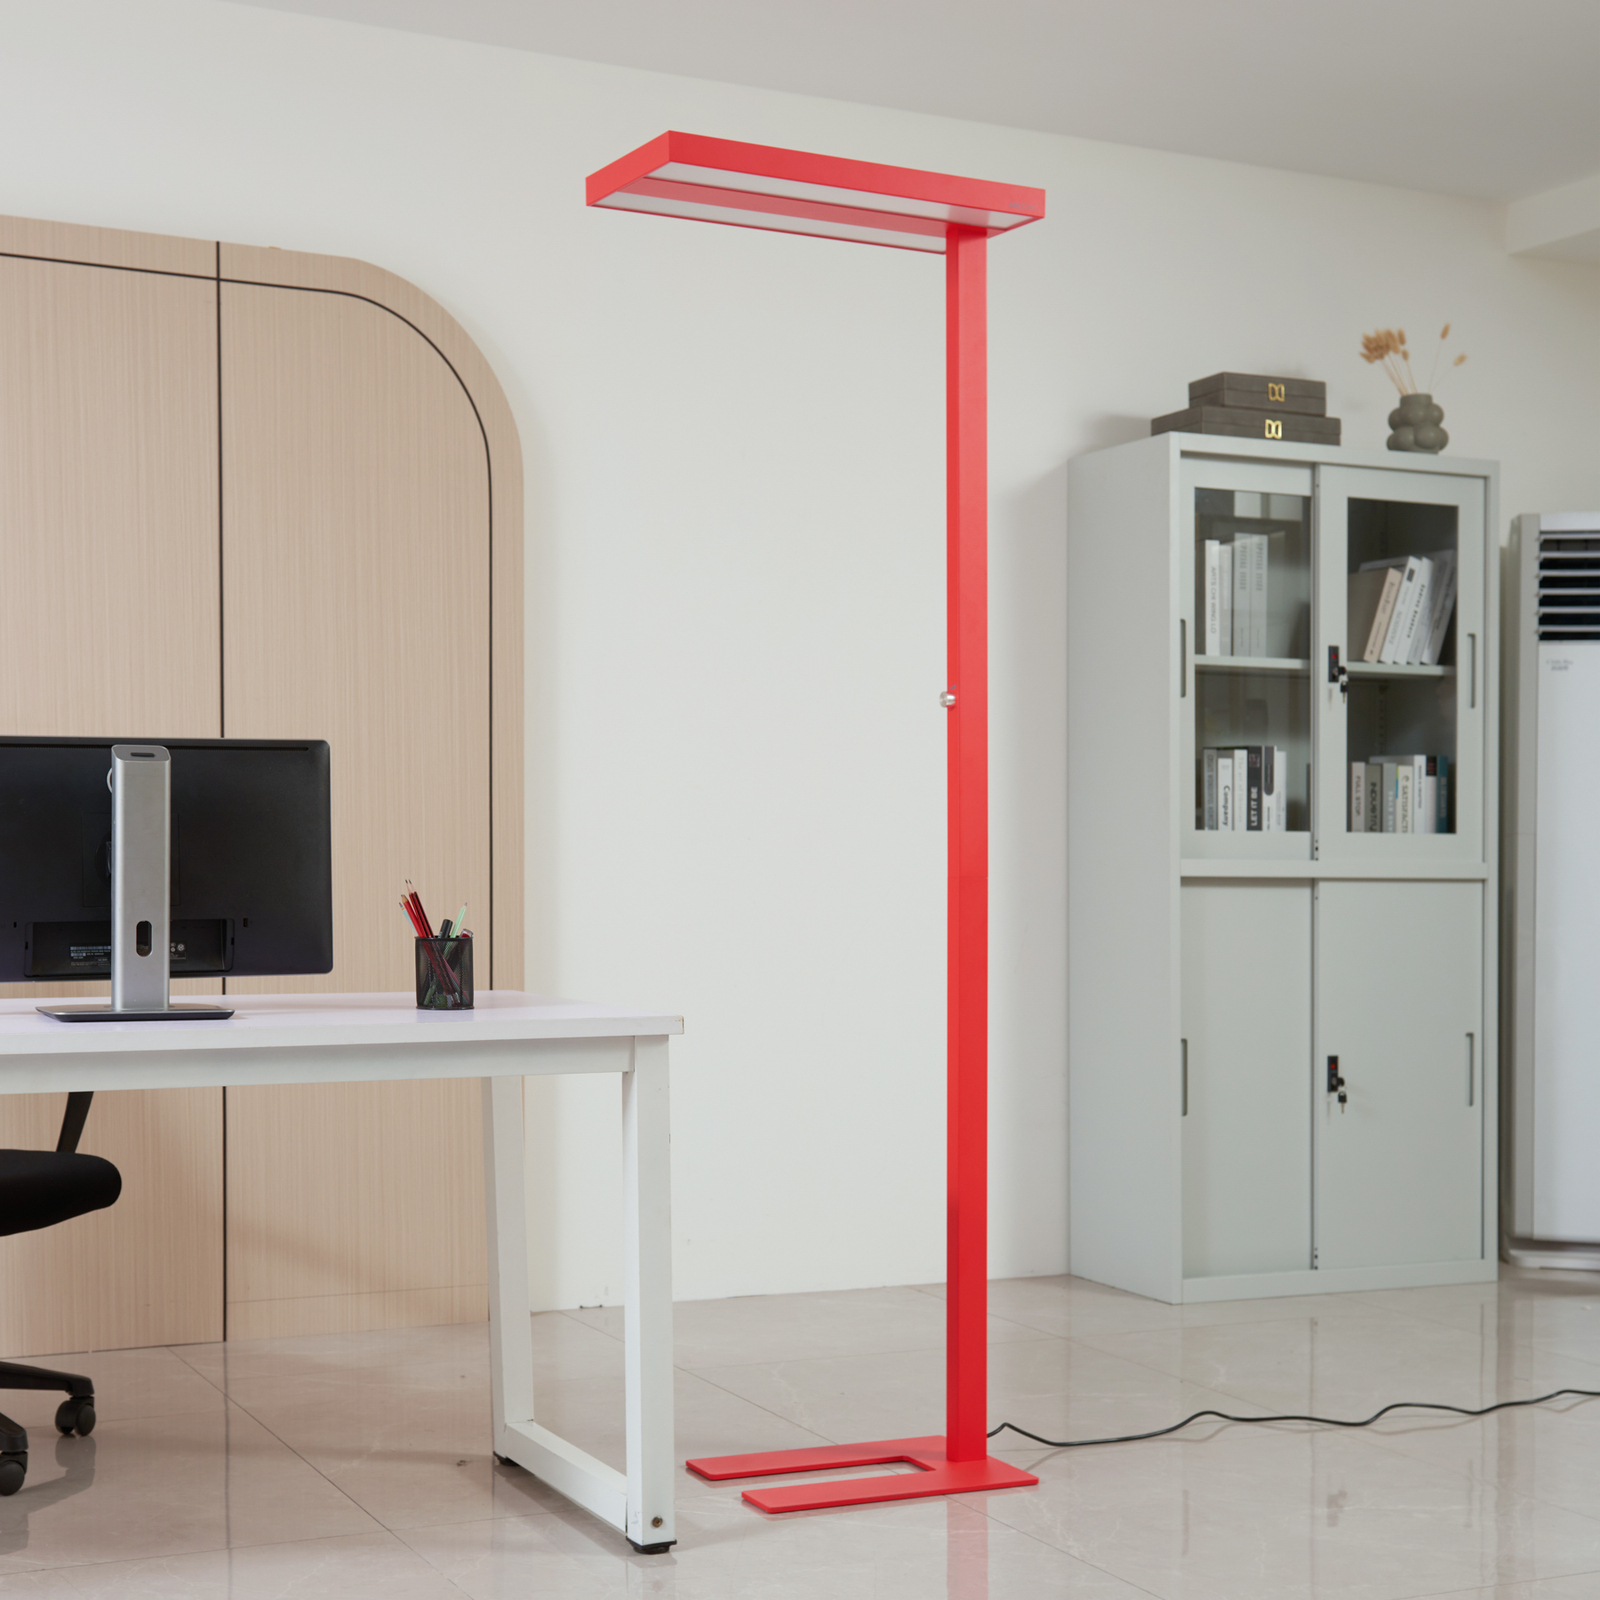 Arcchio LED floor lamp Logan Basic fluorescent red 6,000 lm dimmable